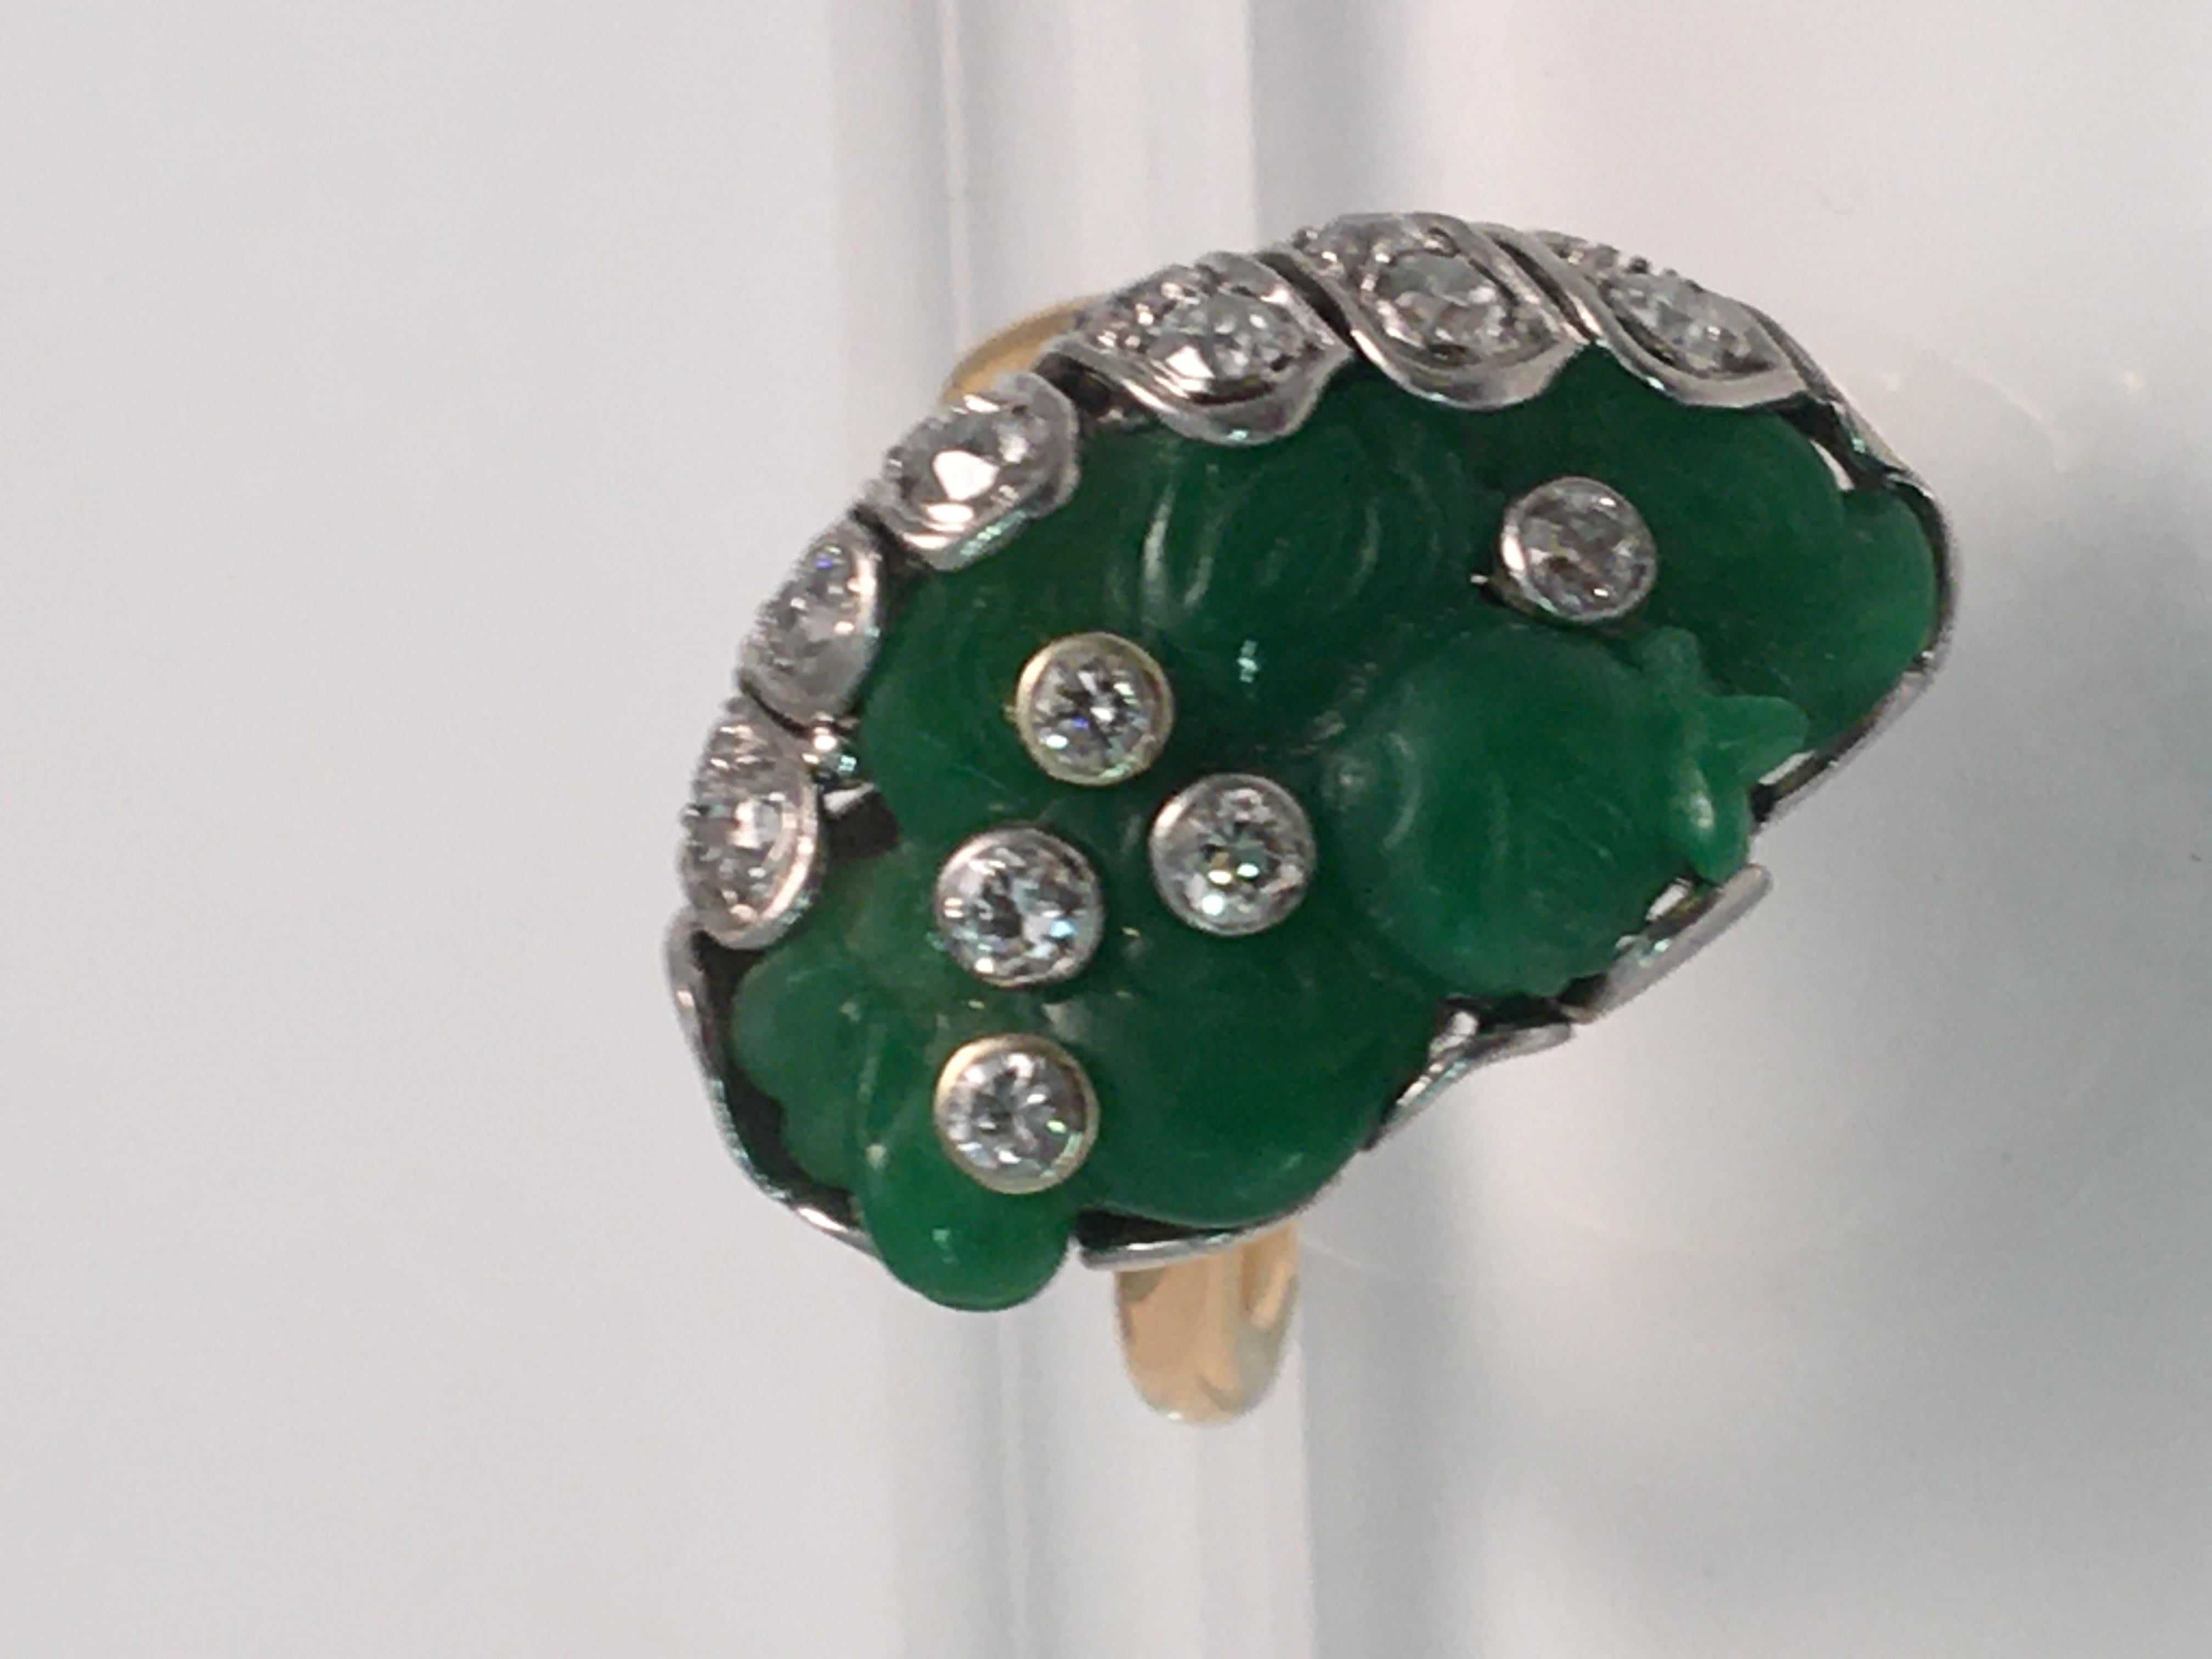 This is a true one-of-a-kind ring that will be the highlight to any outfit!
18 karat yellow and white gold.
Free form green jade approximately 25mm X 14mm X 1.8mm.  Pure green even color.
23 round full cut diamonds, approximately 1.69tdw.
Diamonds